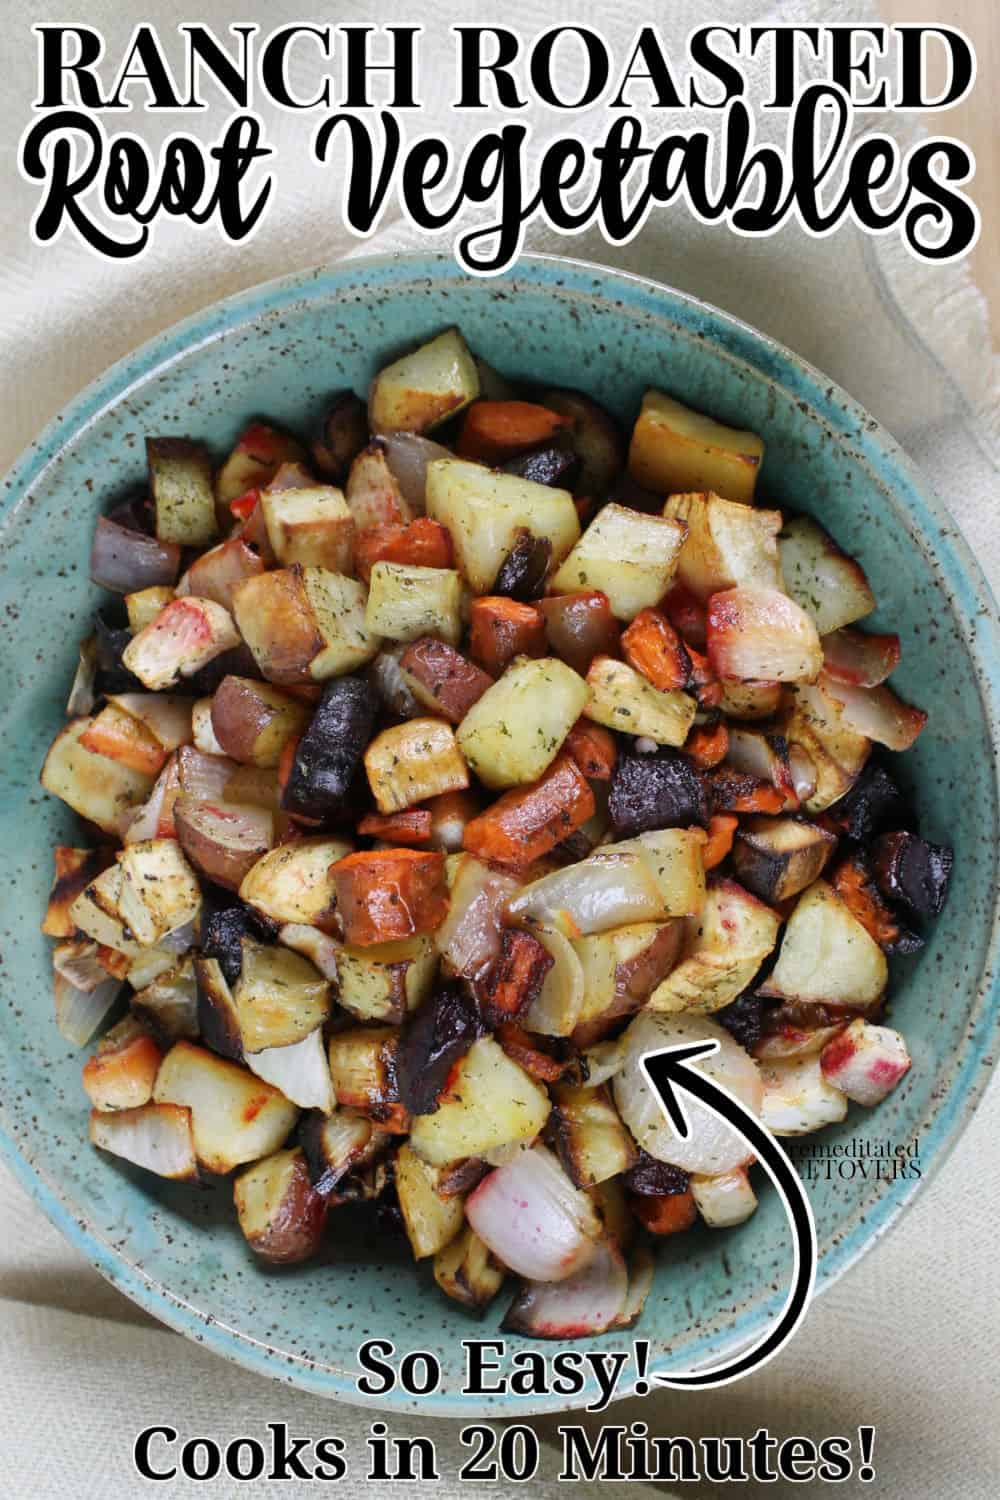 Easy Recipe for Ranch Roasted Root Vegetables